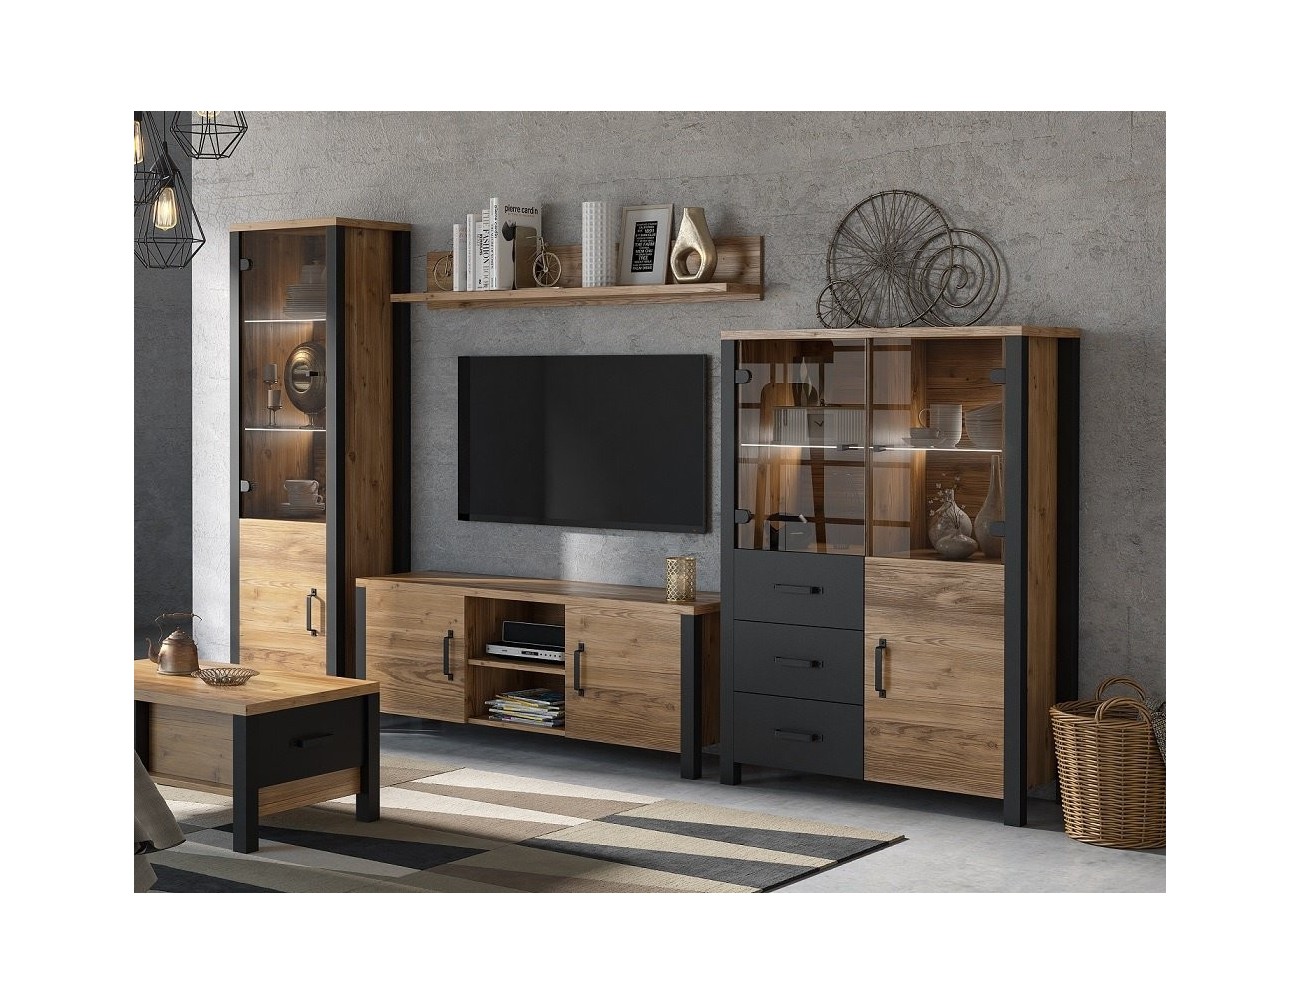 Ollie Collection - J&B Furniture